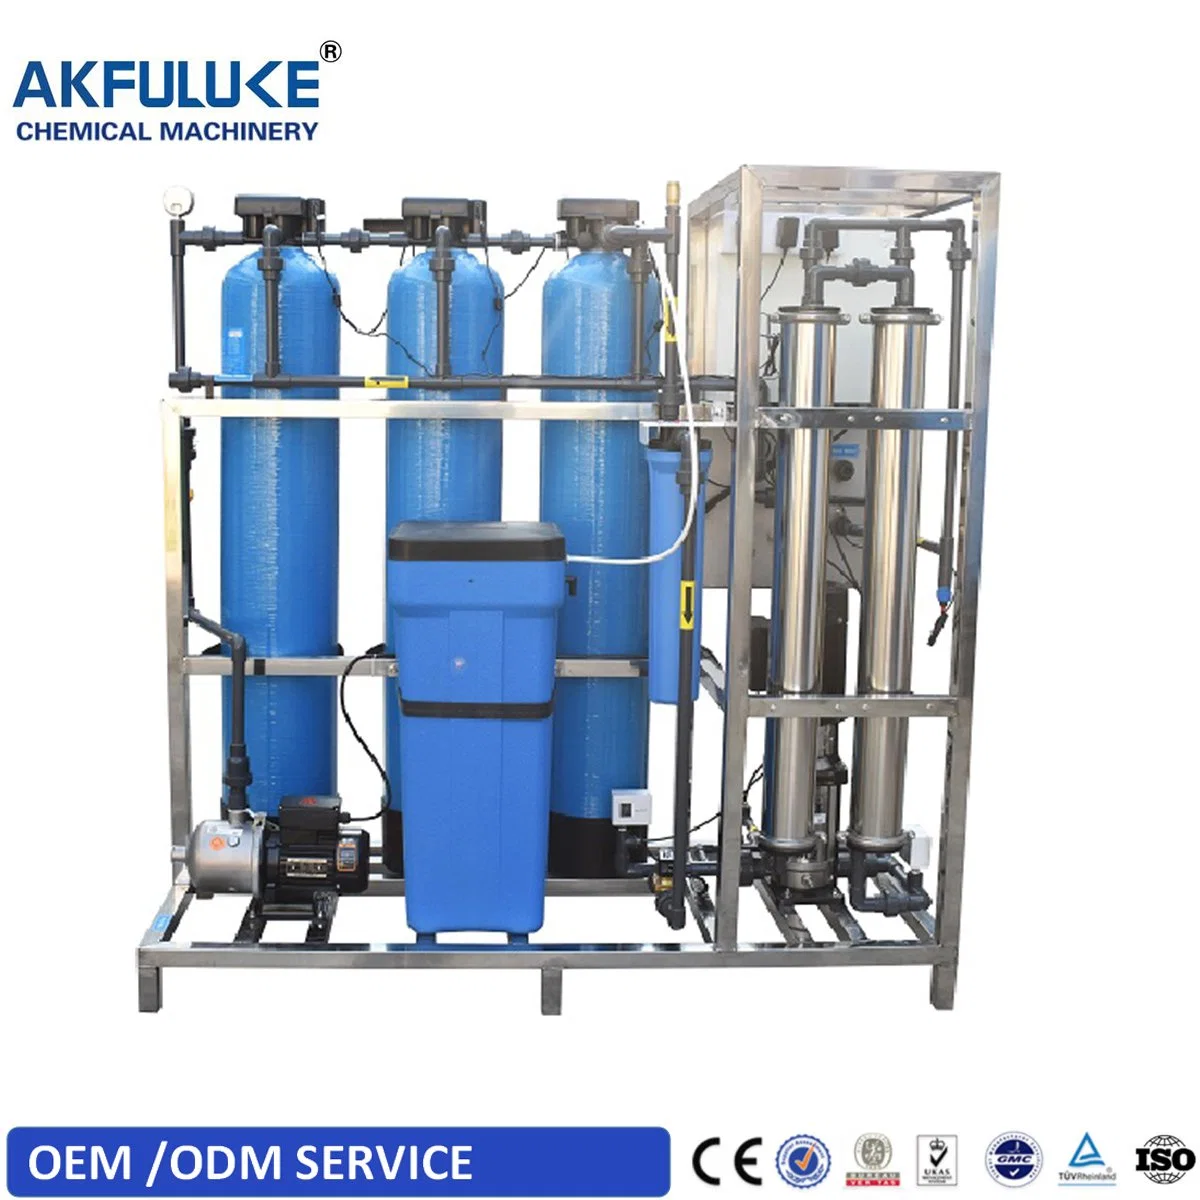 RO Drinking Water Treatment/Purification Ultrafiltration System (UF plant)